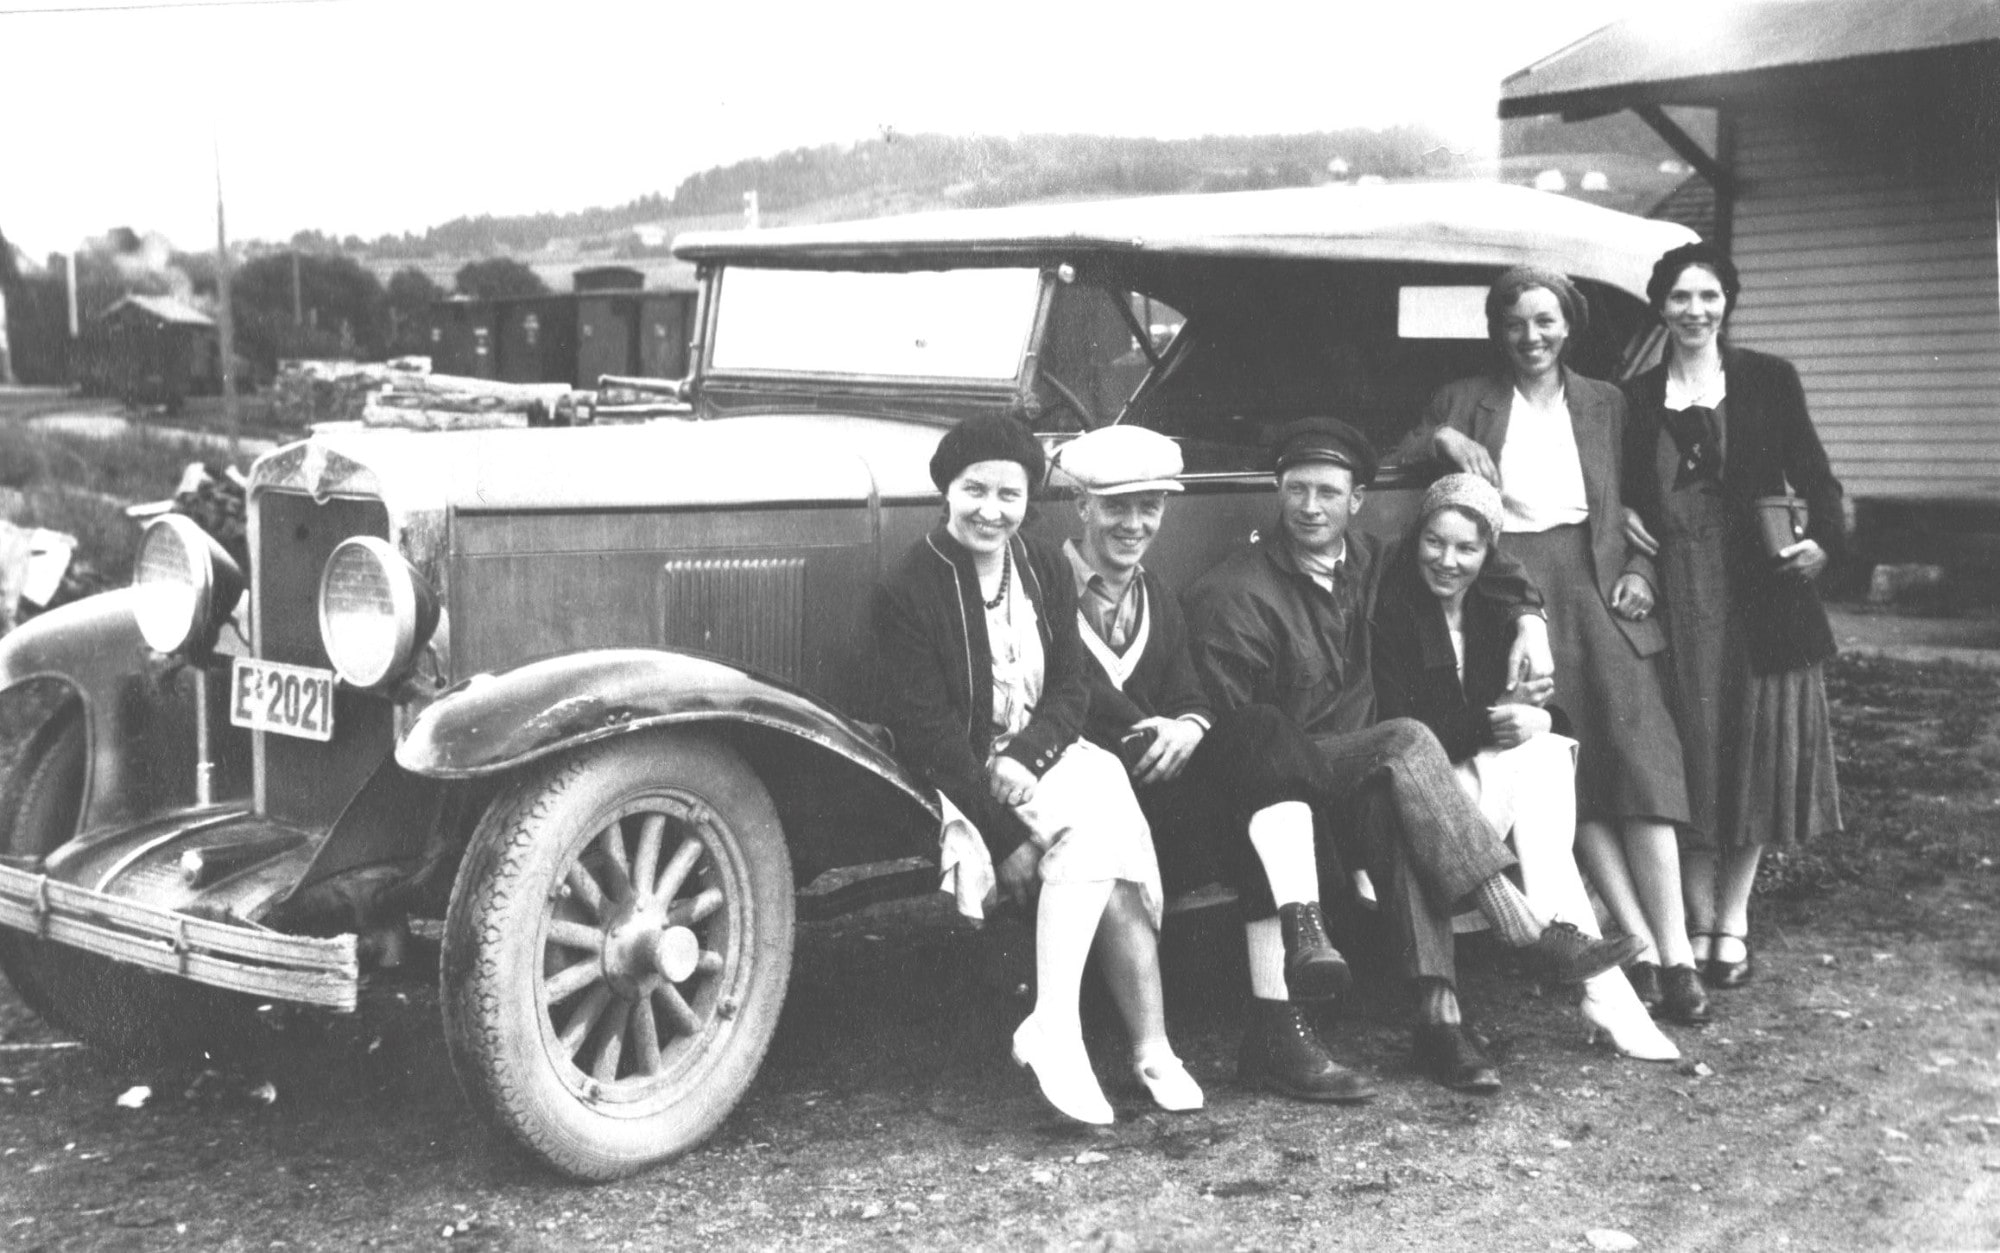 Old black and white photo with people standing next to an old Chevrolet